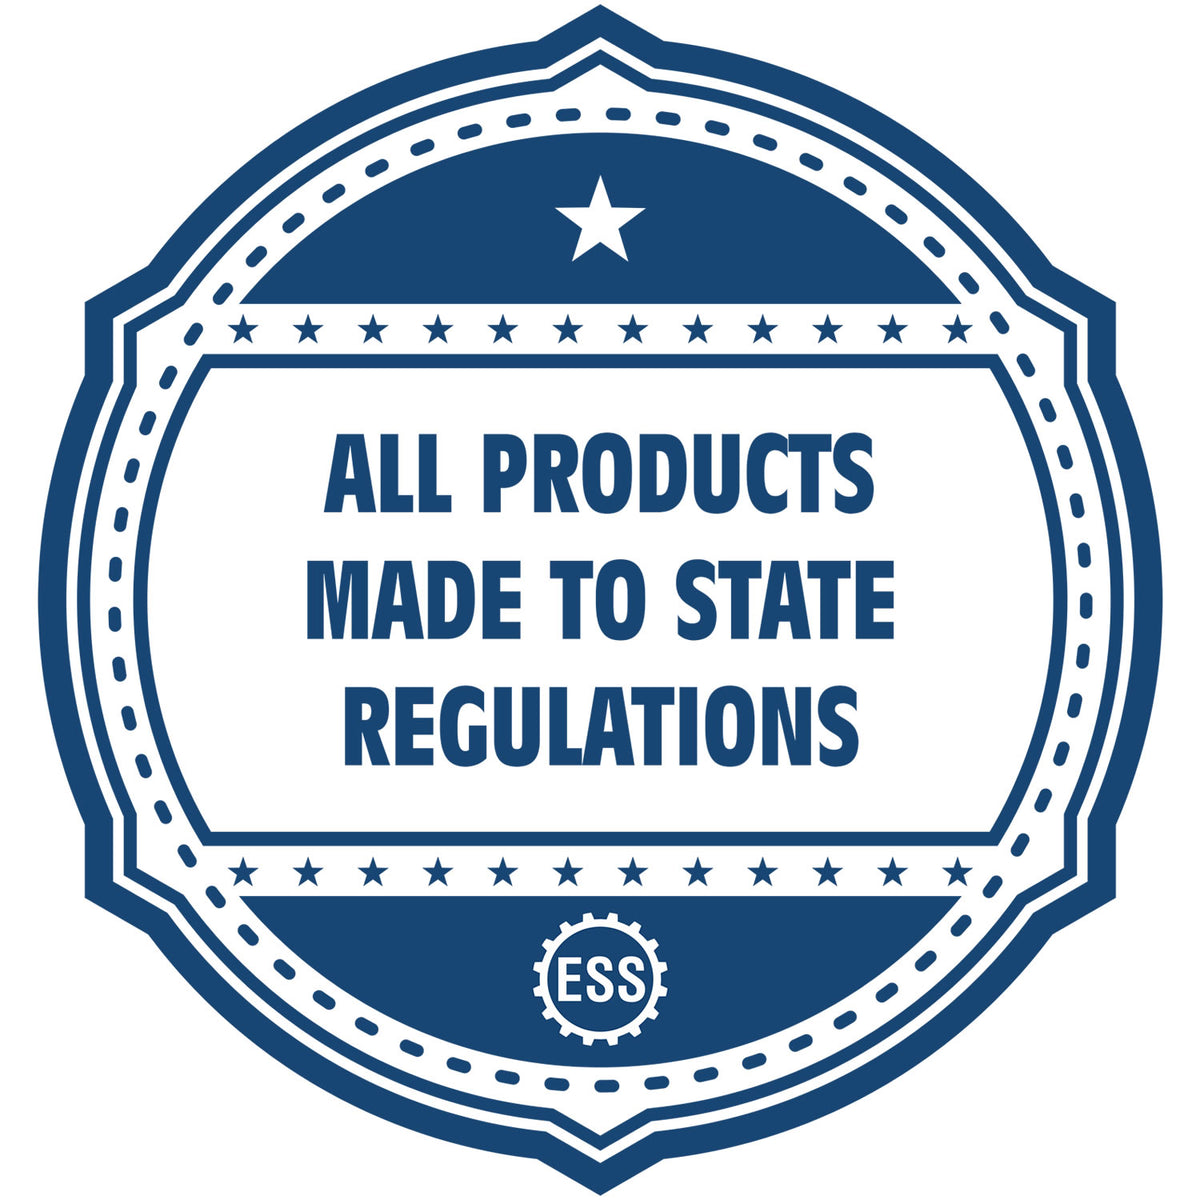 A blue icon or badge for the Self-Inking Tennessee Geologist Stamp showing that this product is made in compliance with state regulations.